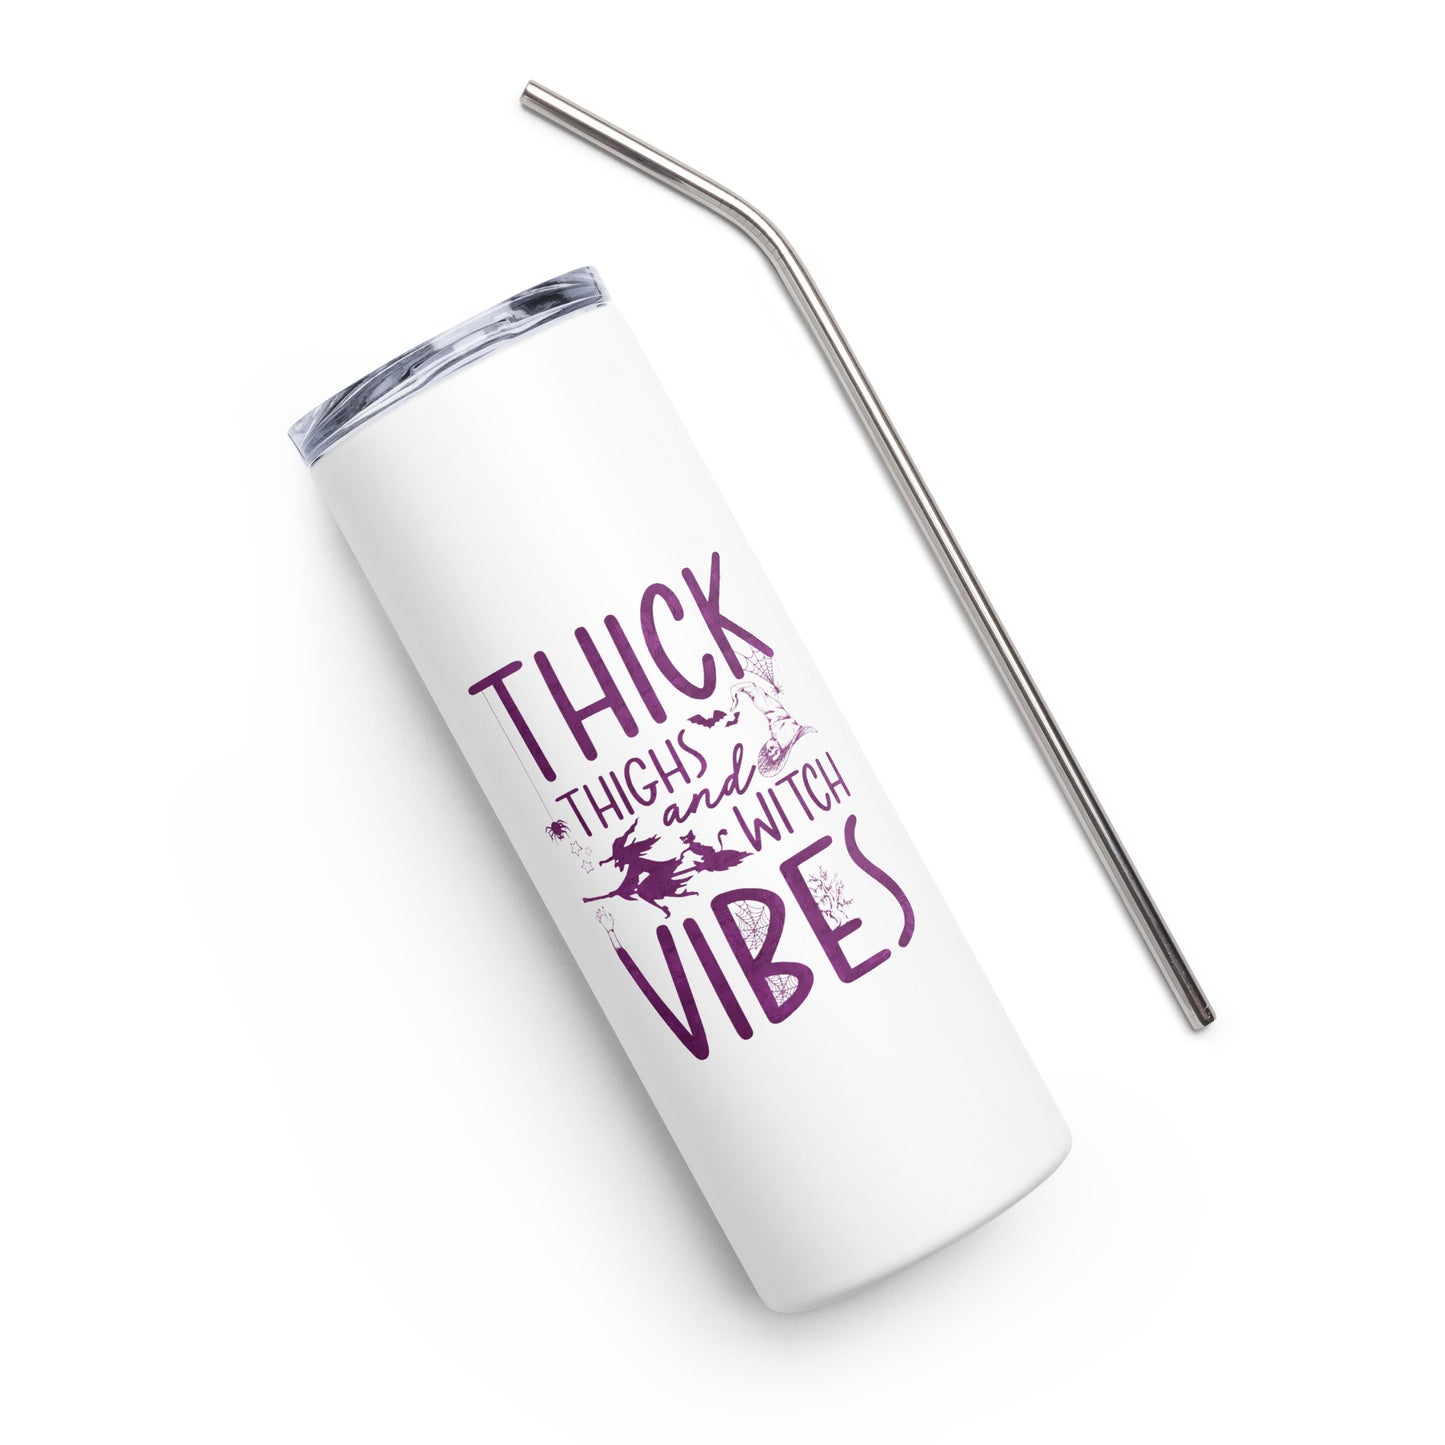 Thick Thighs and Witch Vibes Stainless steel tumbler